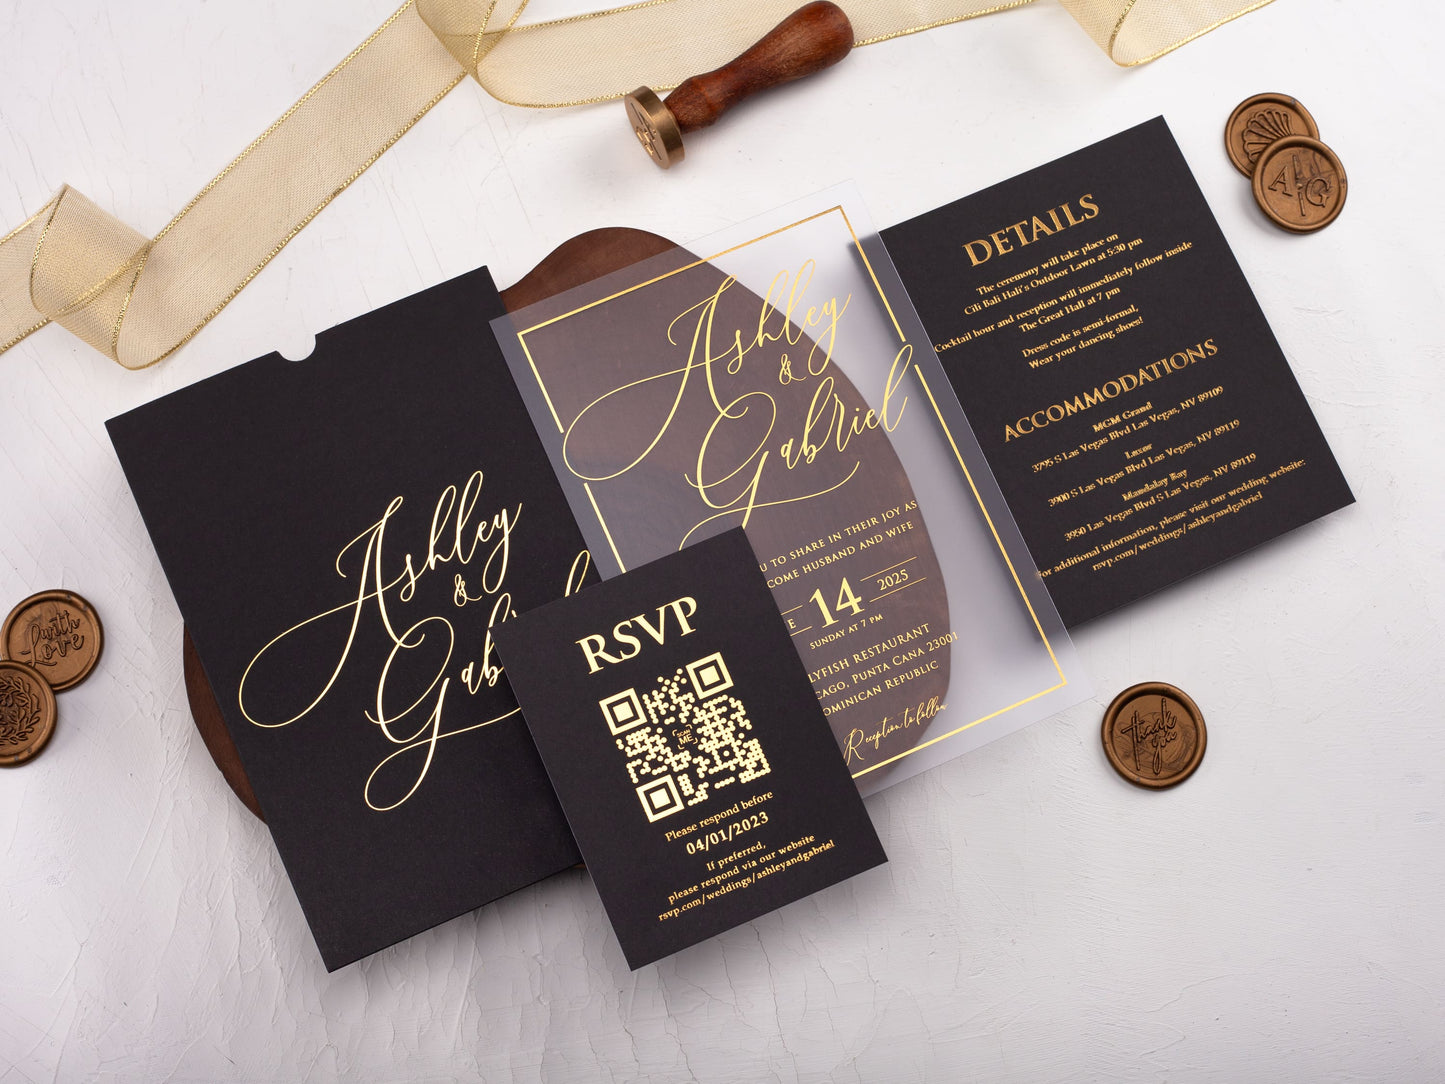 Gold Foil Printed Acrylic Invitation with Black Sleeve Envelope